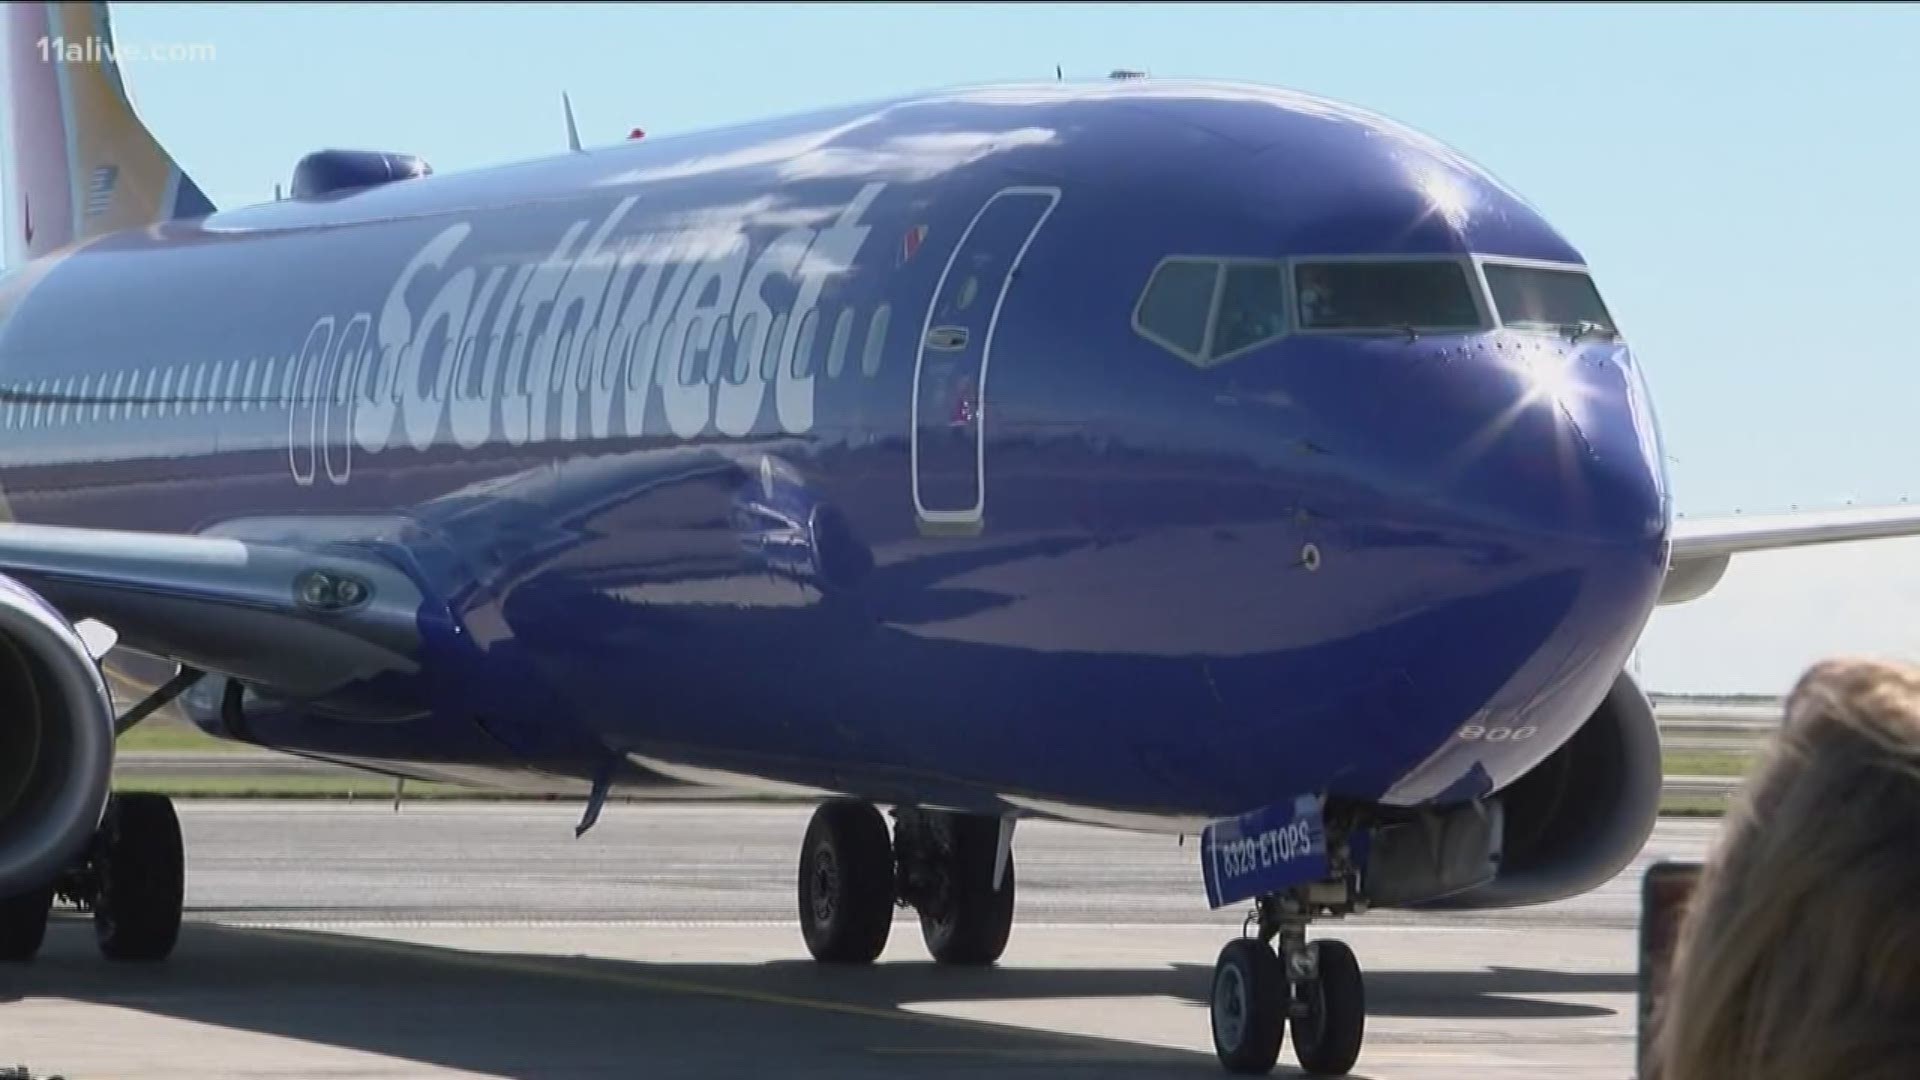 Southwest said it is shifting its people and planes to destinations where there's greater demand.